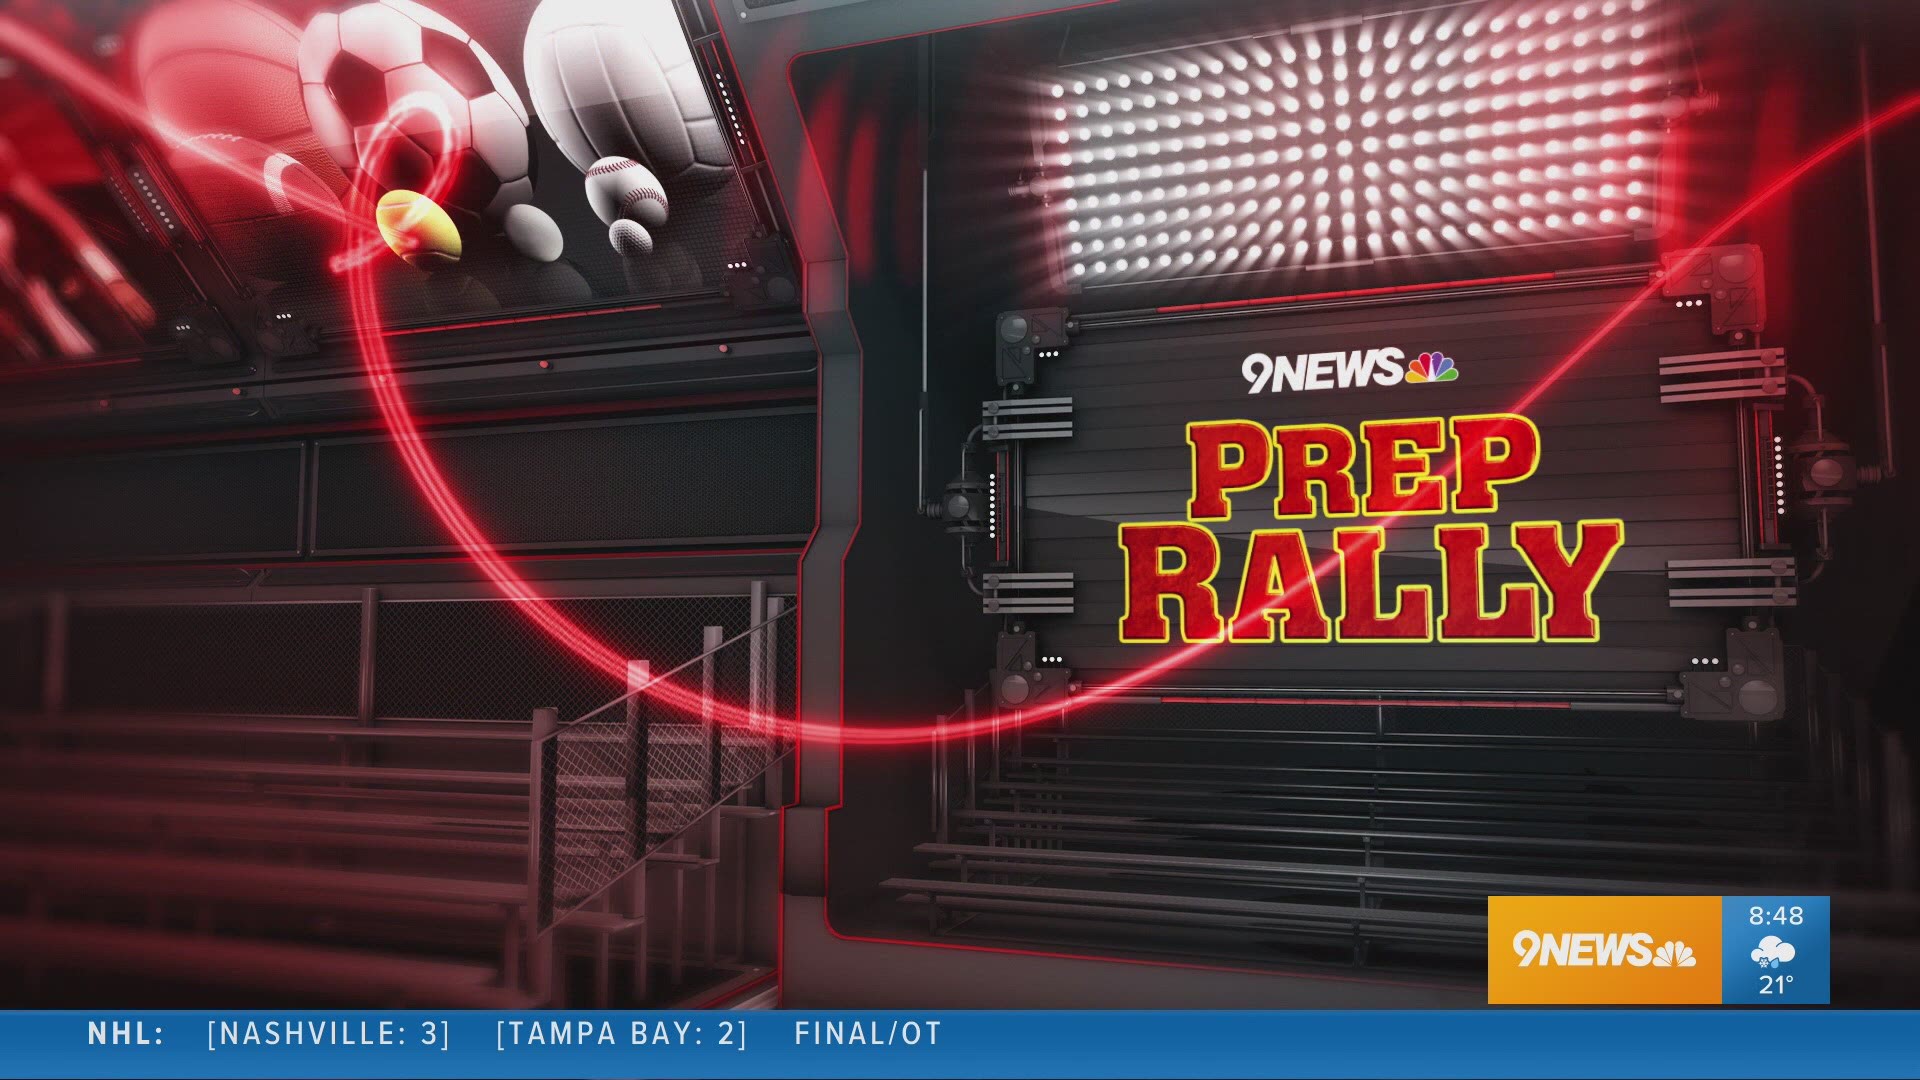 Sunday's Prep Rally features our 9NEWS Game of the Week, highlights from week 9 of HS football, state softball, state cross country, and our Honor Roll winner.